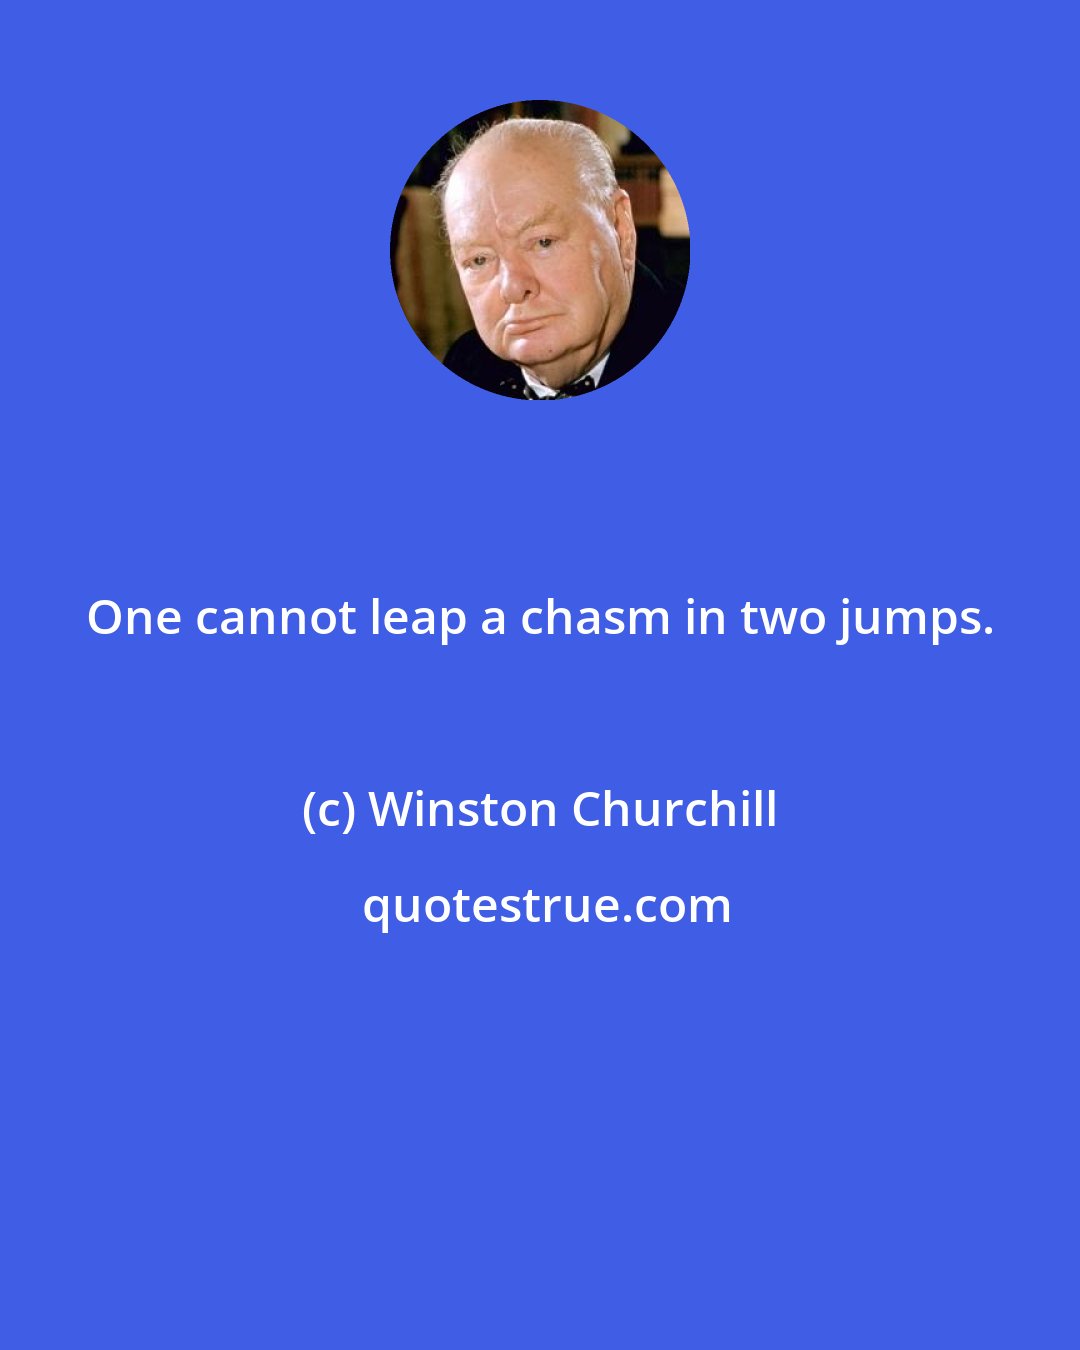 Winston Churchill: One cannot leap a chasm in two jumps.